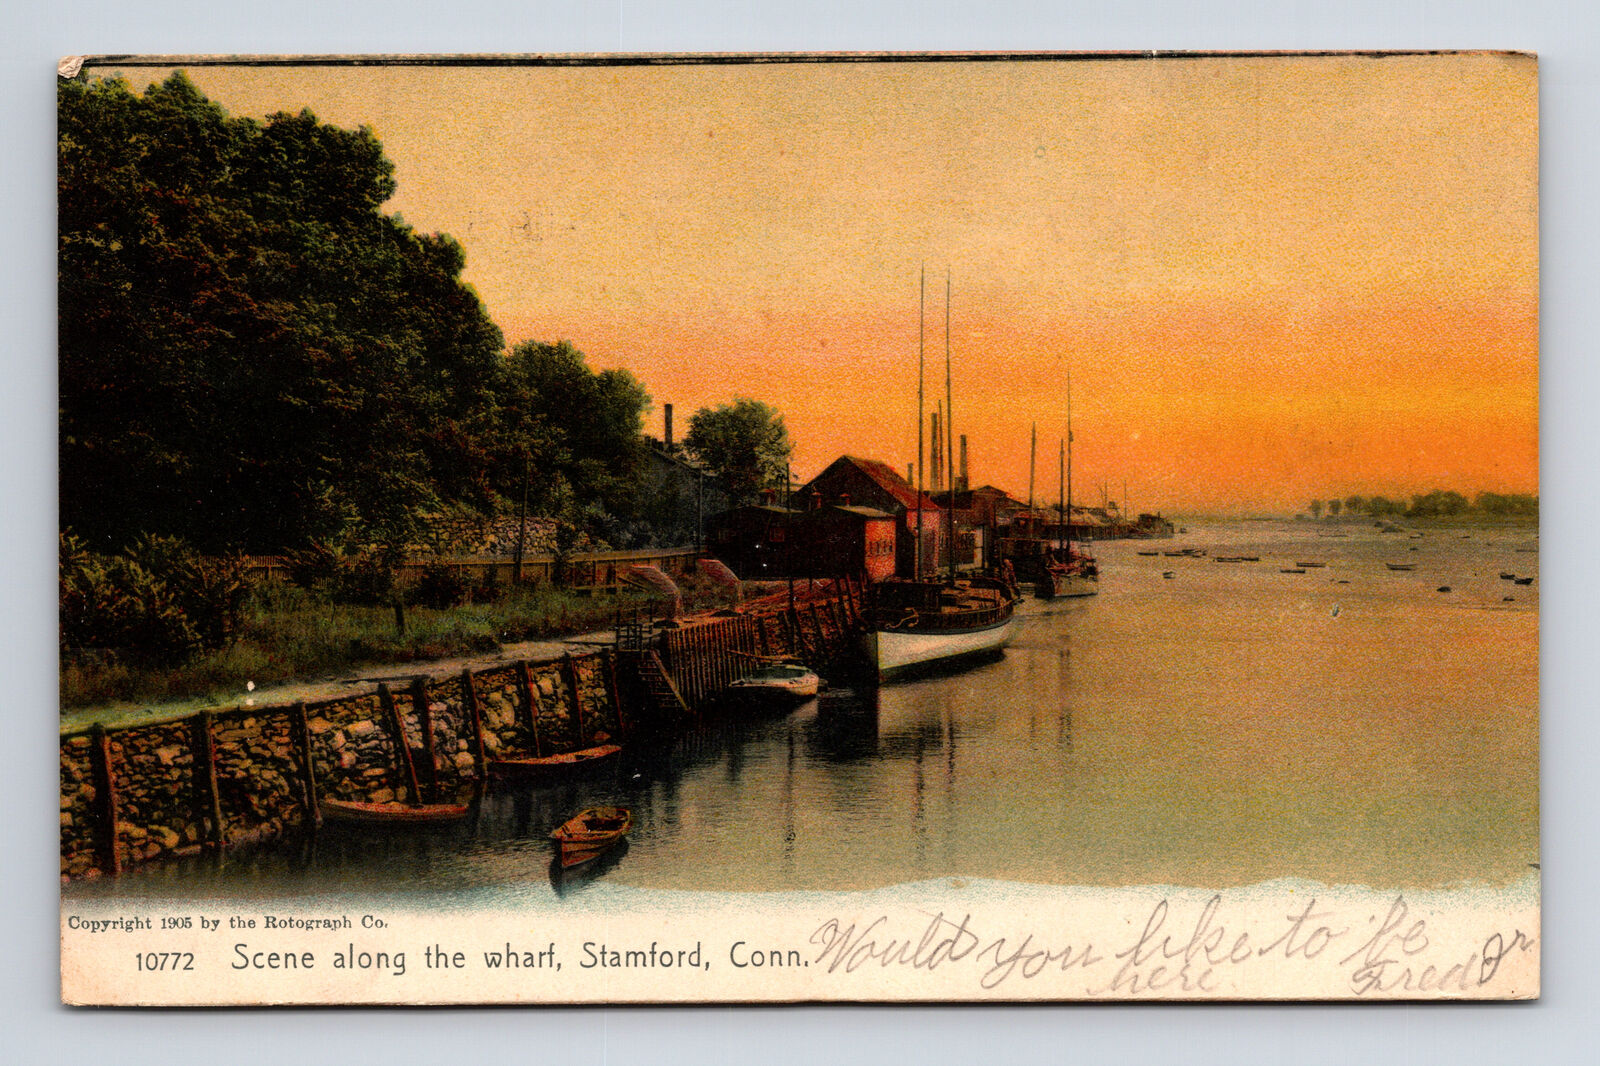 Scene along the Wharf Harbor at Stamford Connecticut CT ROTOGRAPH Postcard